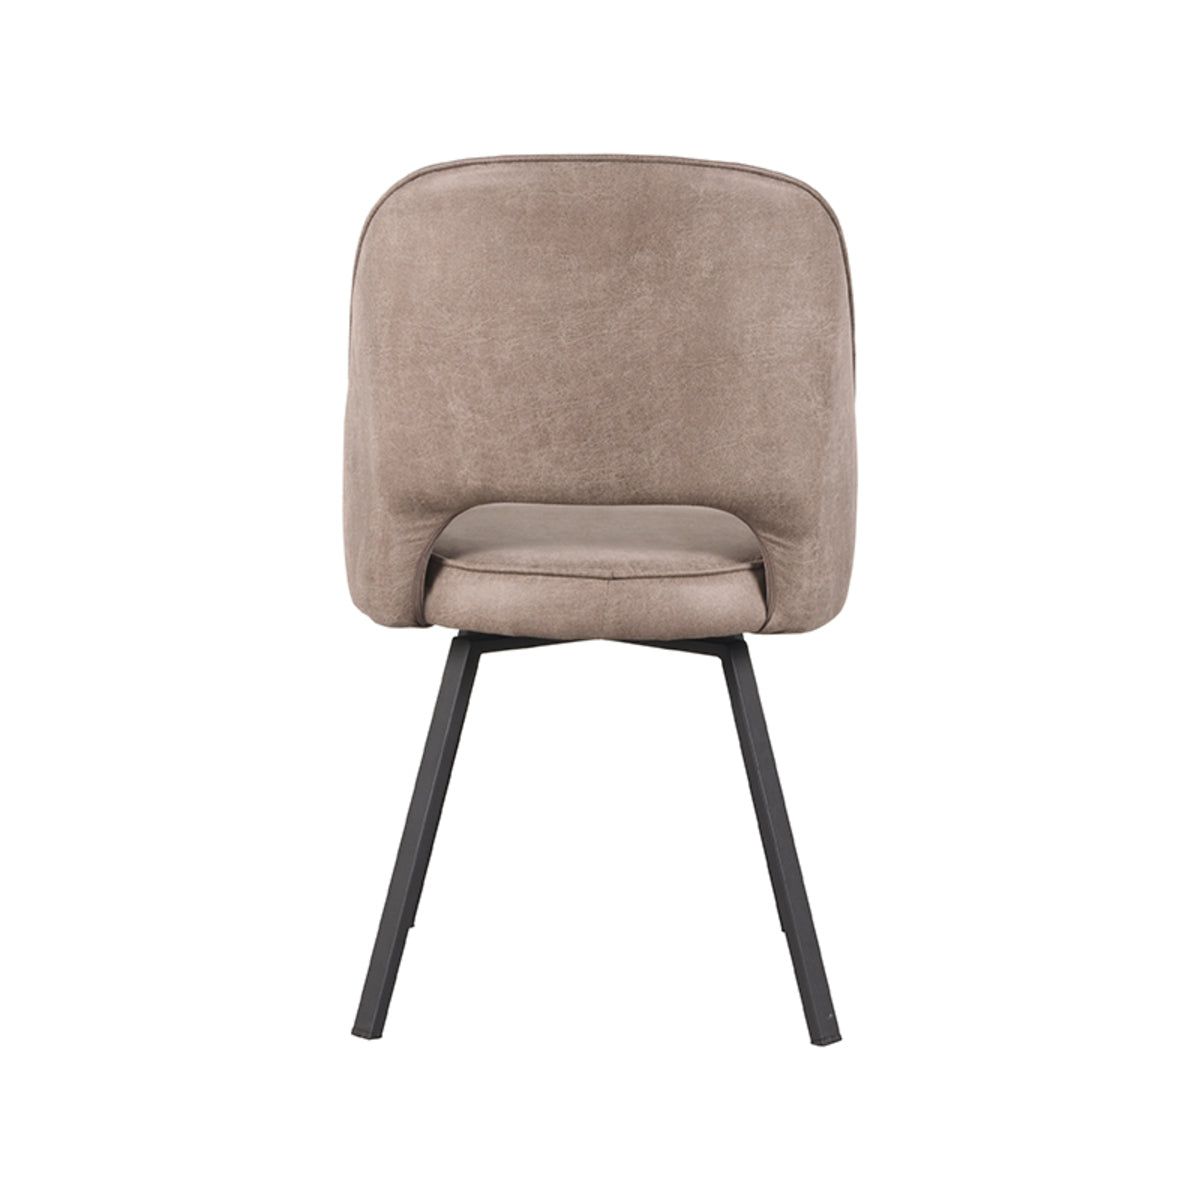 LABEL51 Lewis dining room chair - Taupe - Microfiber | 2 pieces